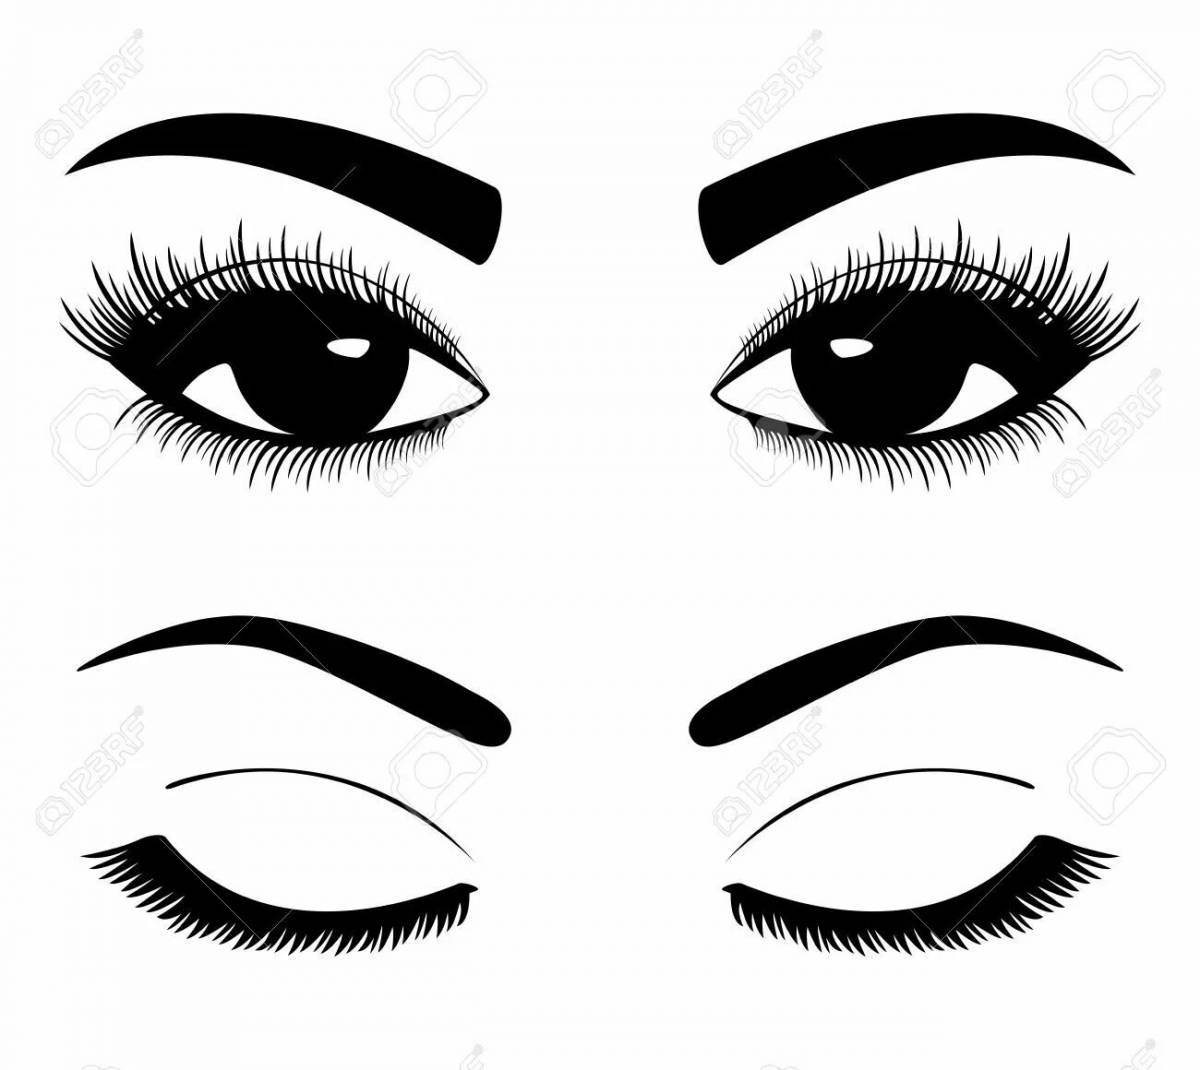 Eye-glamourizing coloring page eyes for makeup